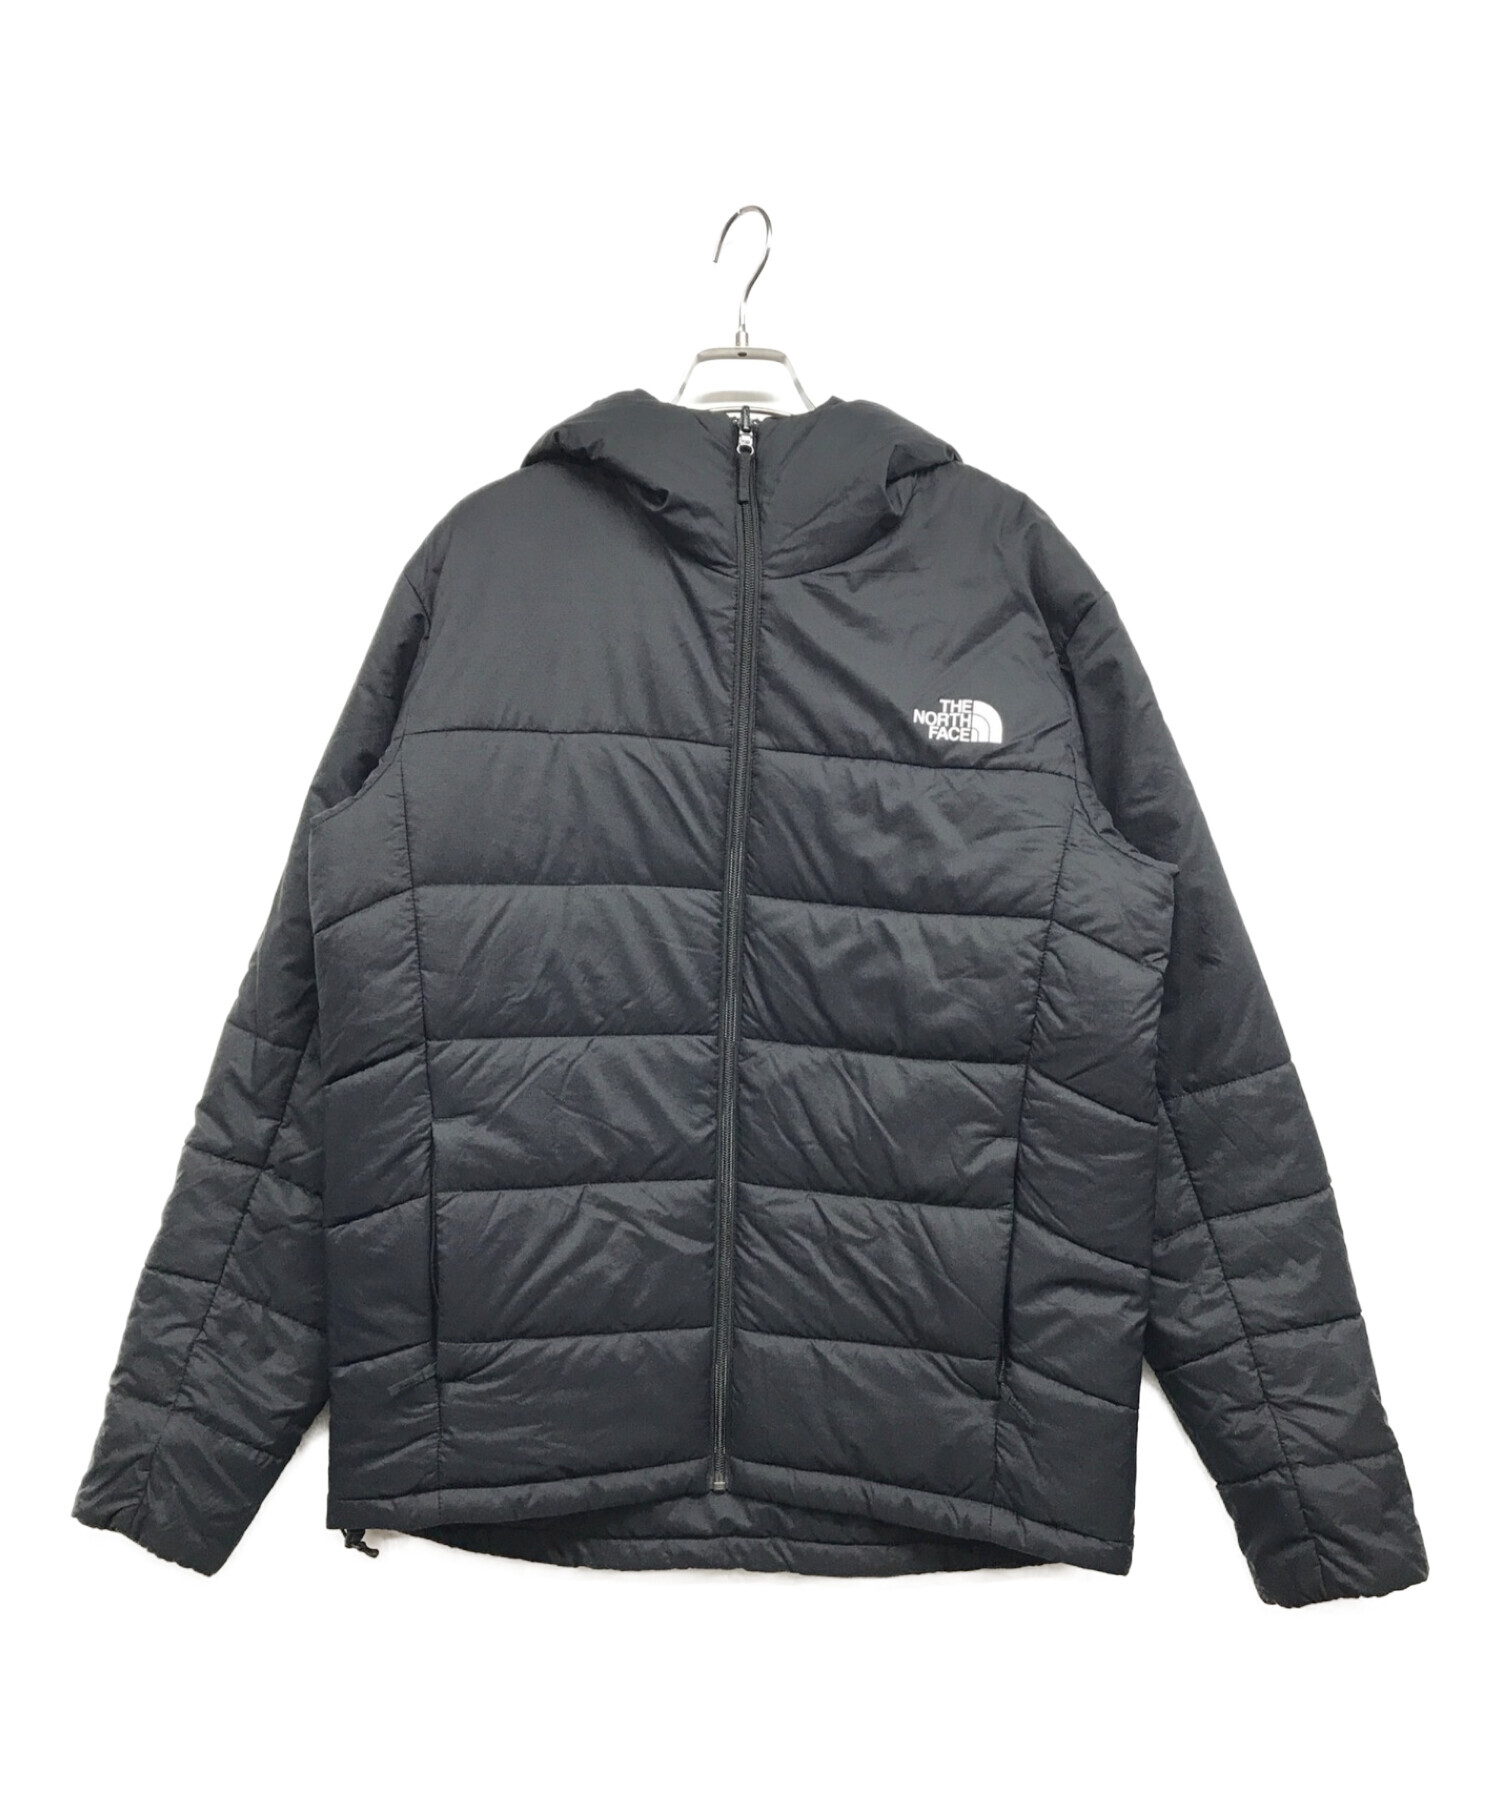 THE NORTH FACE Reversible Hoodie